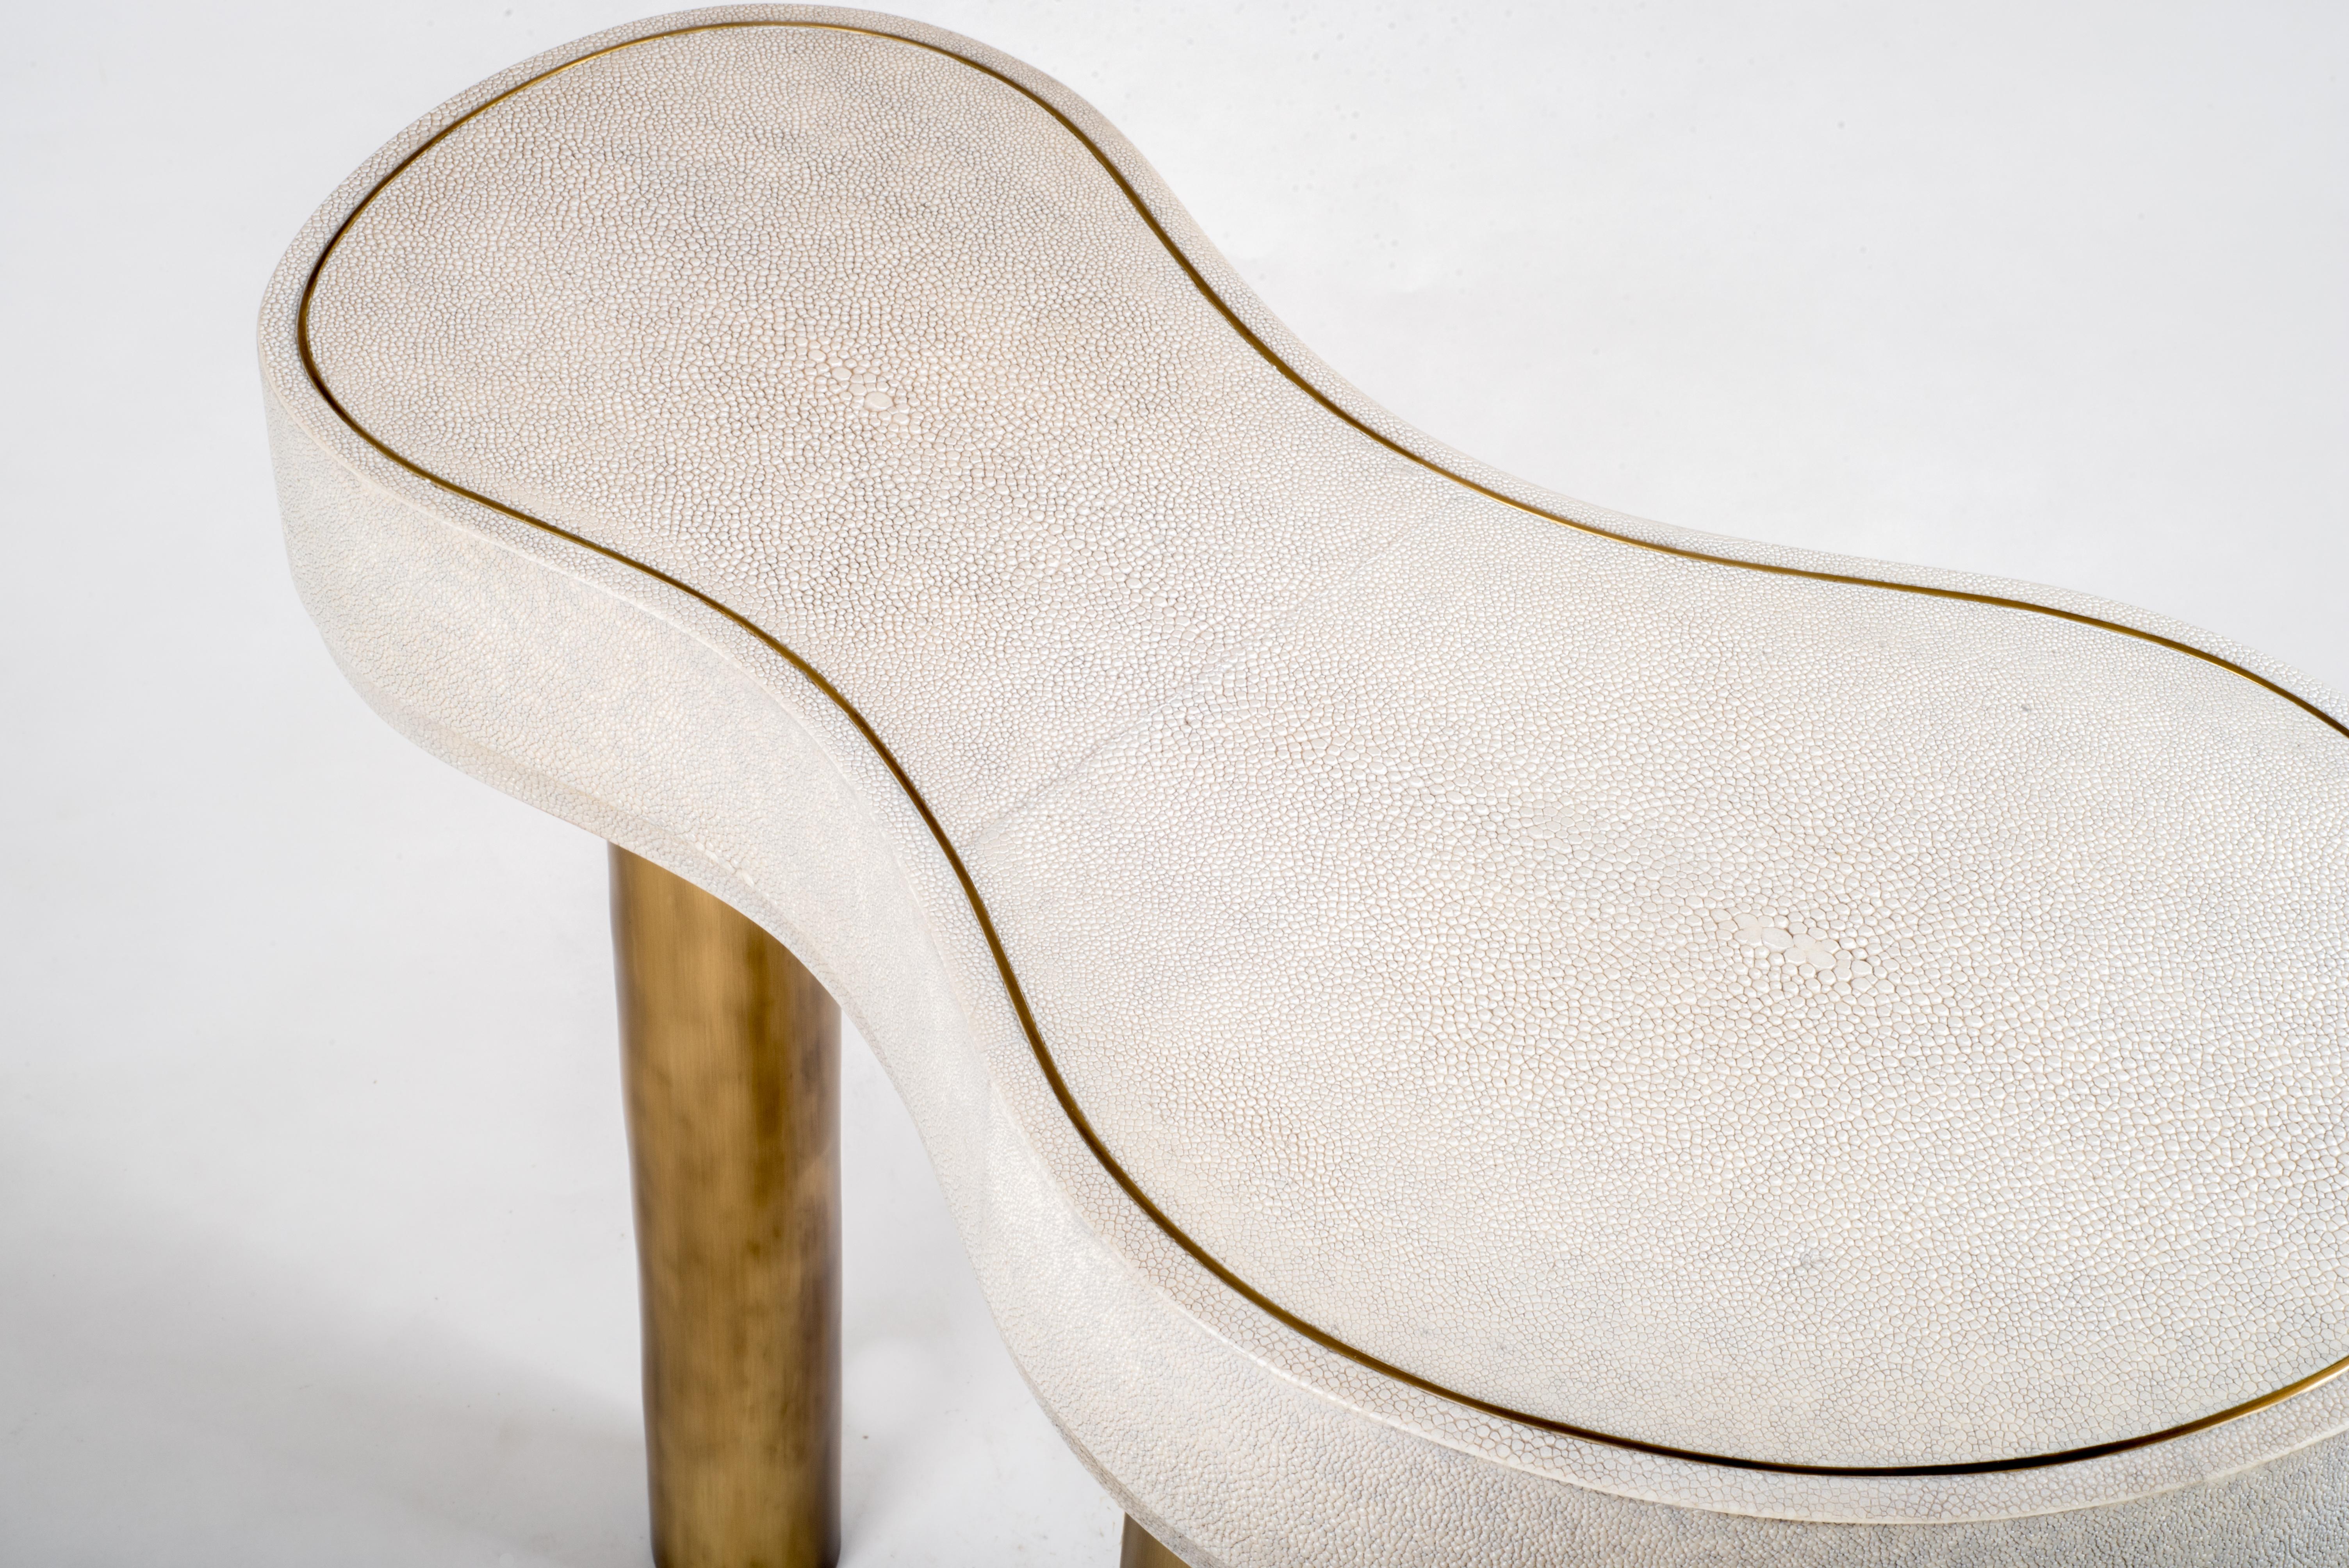 Art Deco Constellation Side Table in Cream Shagreen and Bronze-Patina Brass by Kifu Paris